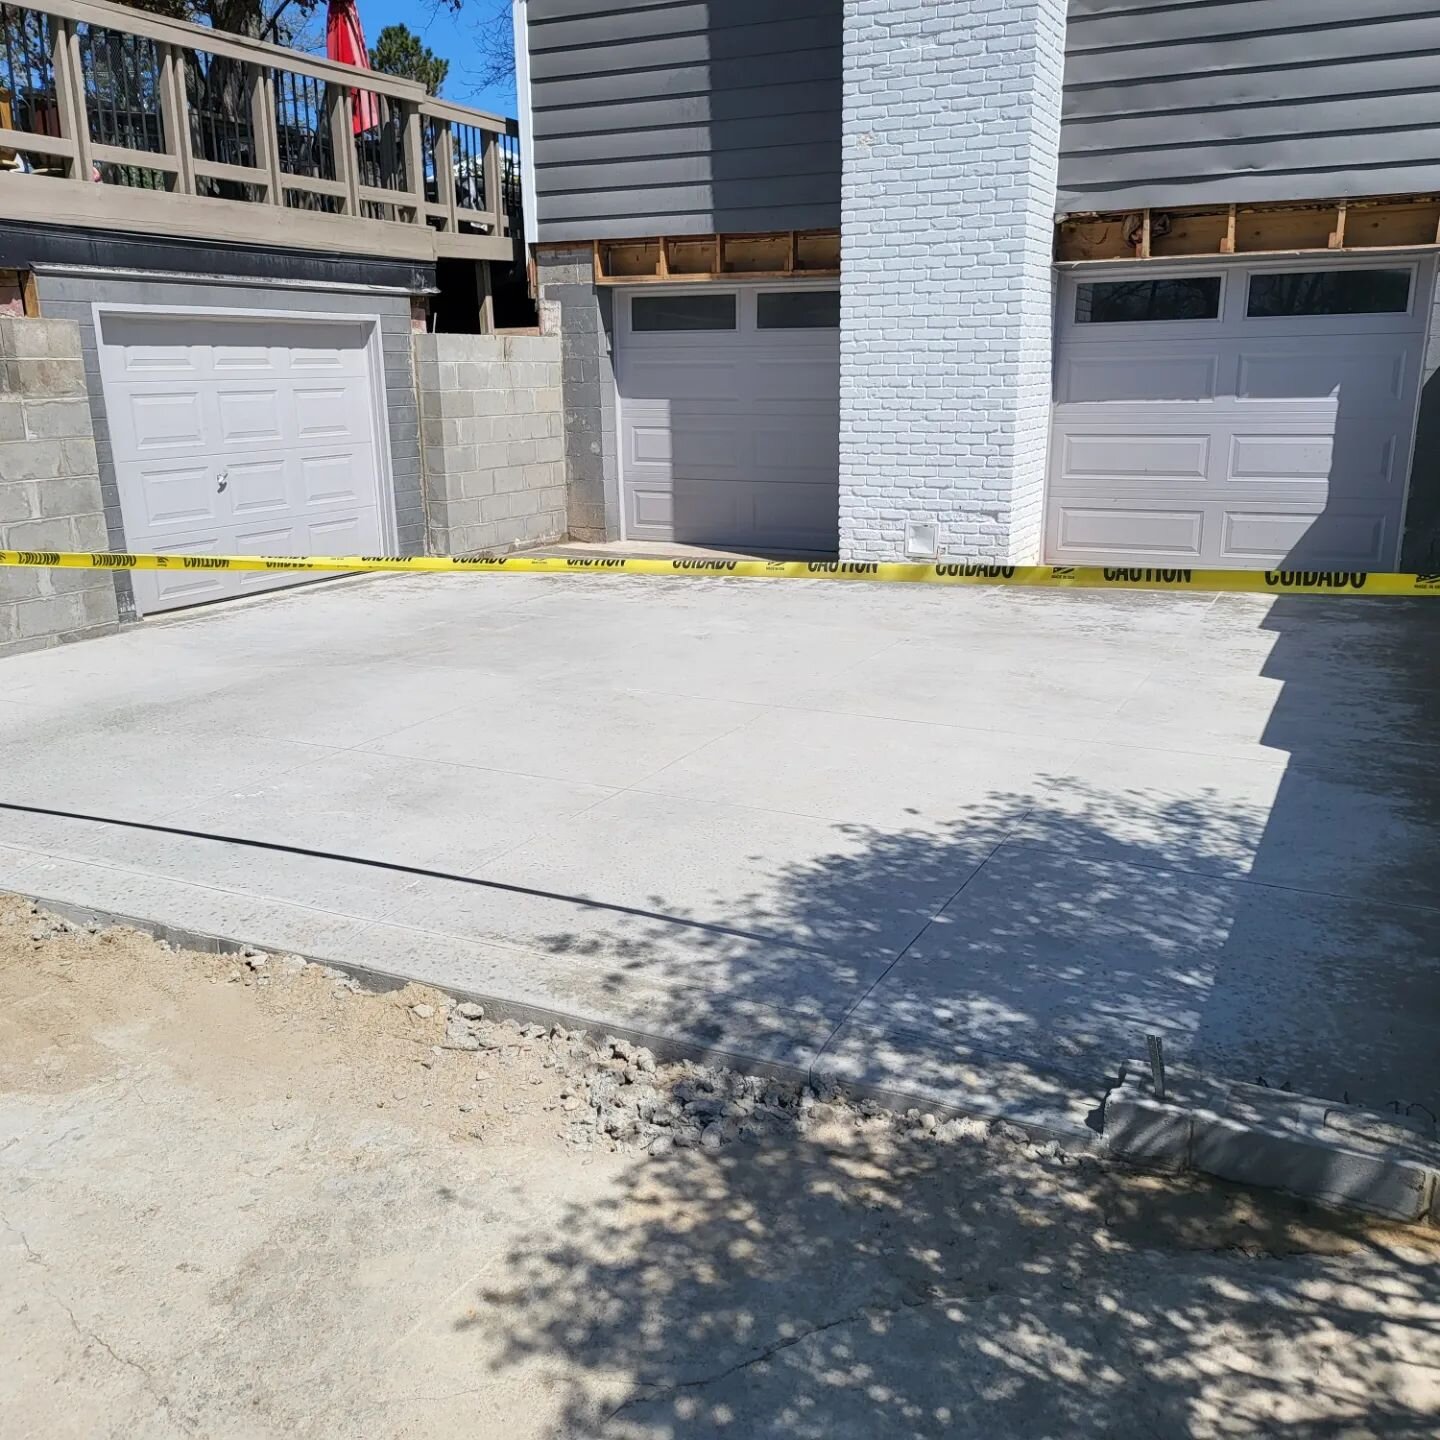 Foundation and new garage pad in the books! Now let's get to framing this new mother in-law suite.!

#concrete 
#motherinlawsuite 
#contractor 
#framing 
#smallbusiness